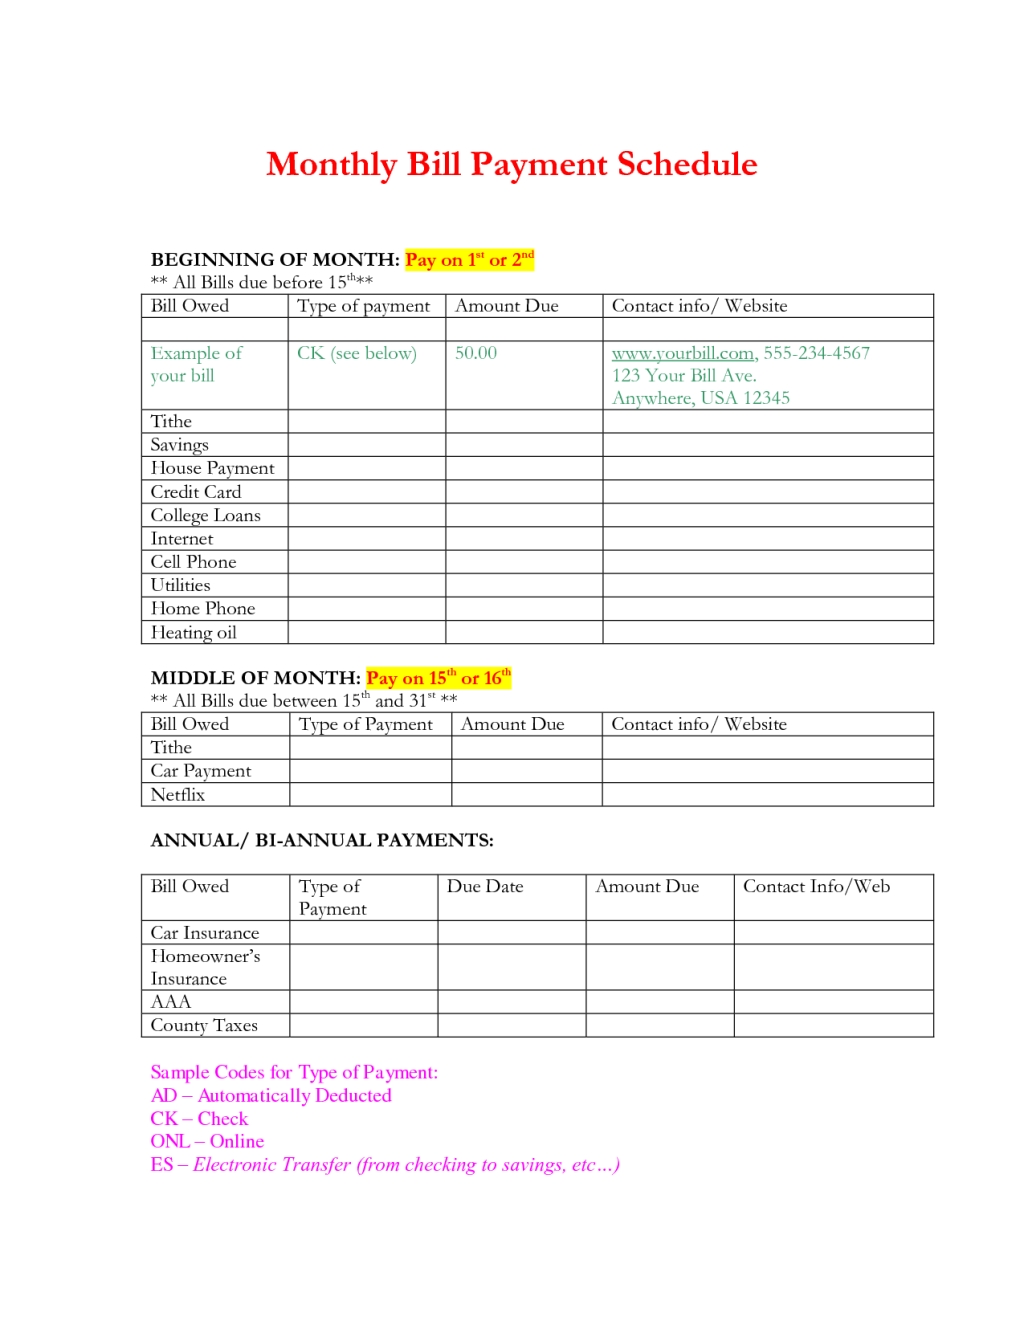 Monthly Bill Chart Template – Bookhotels.tk intended for Printable Monthly Bill Payment Chart